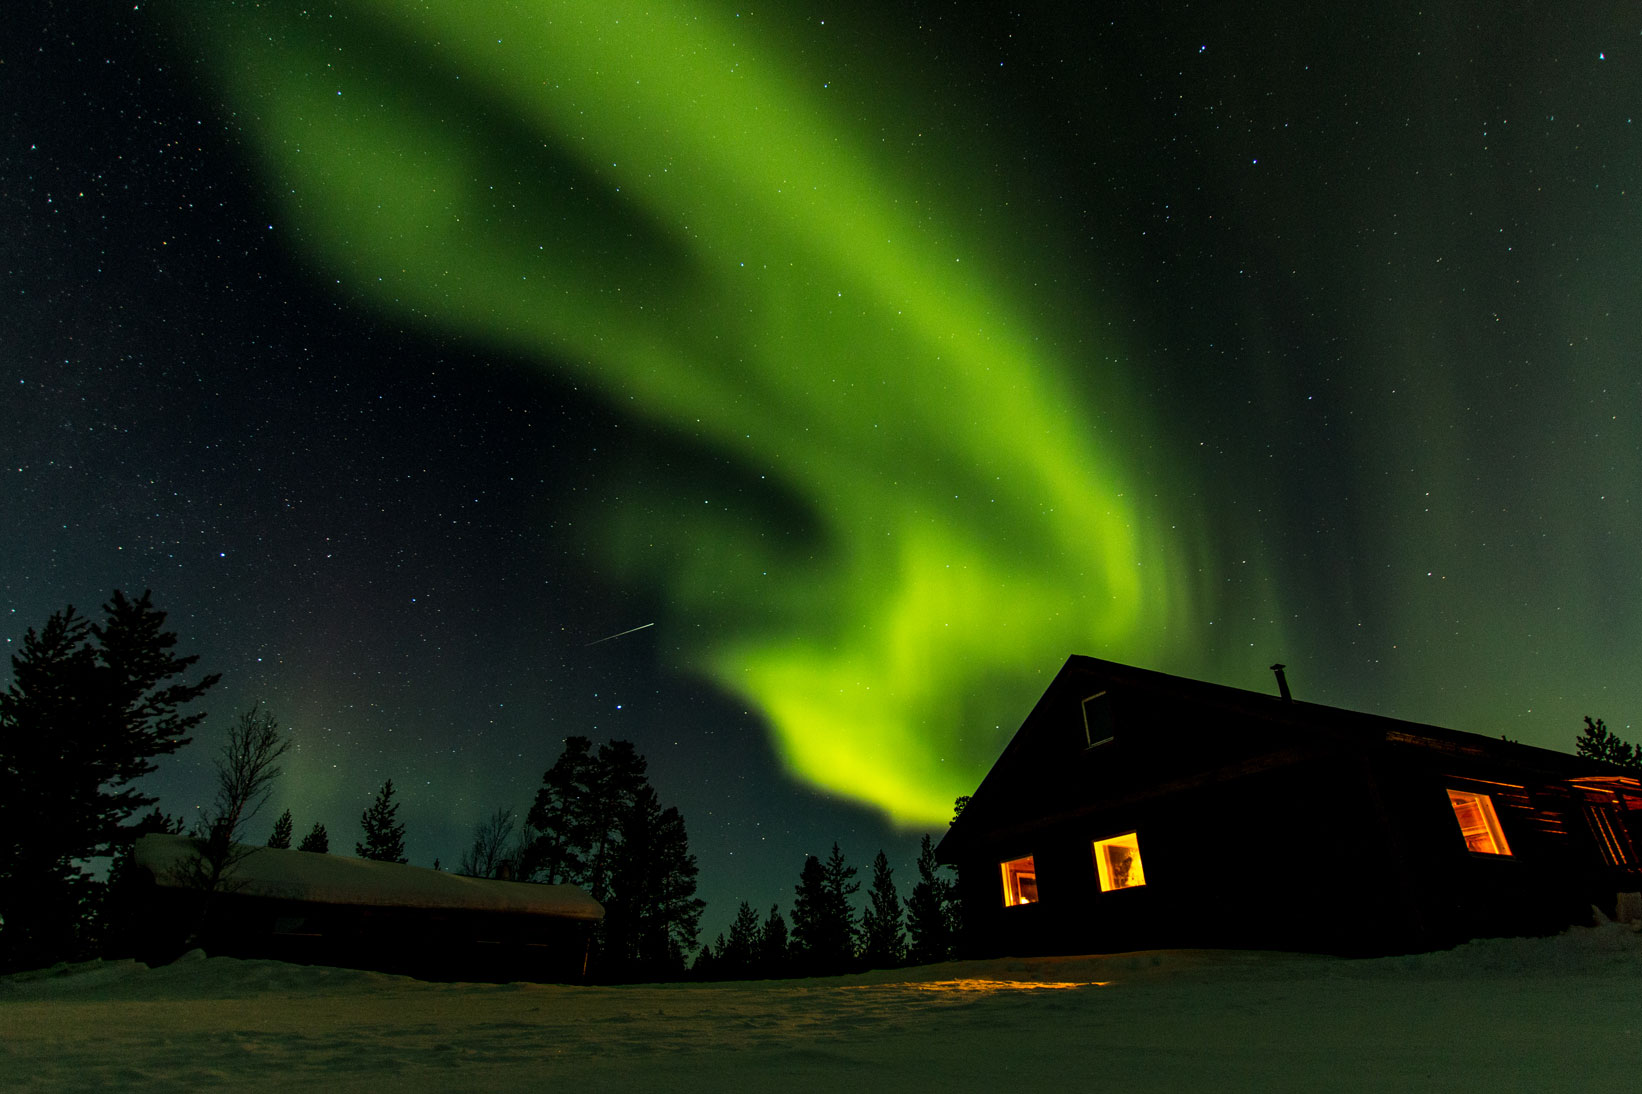 A house in snow at night, lighted up from within and a stunning bright green aurora formation in the sky behind it, Sweden